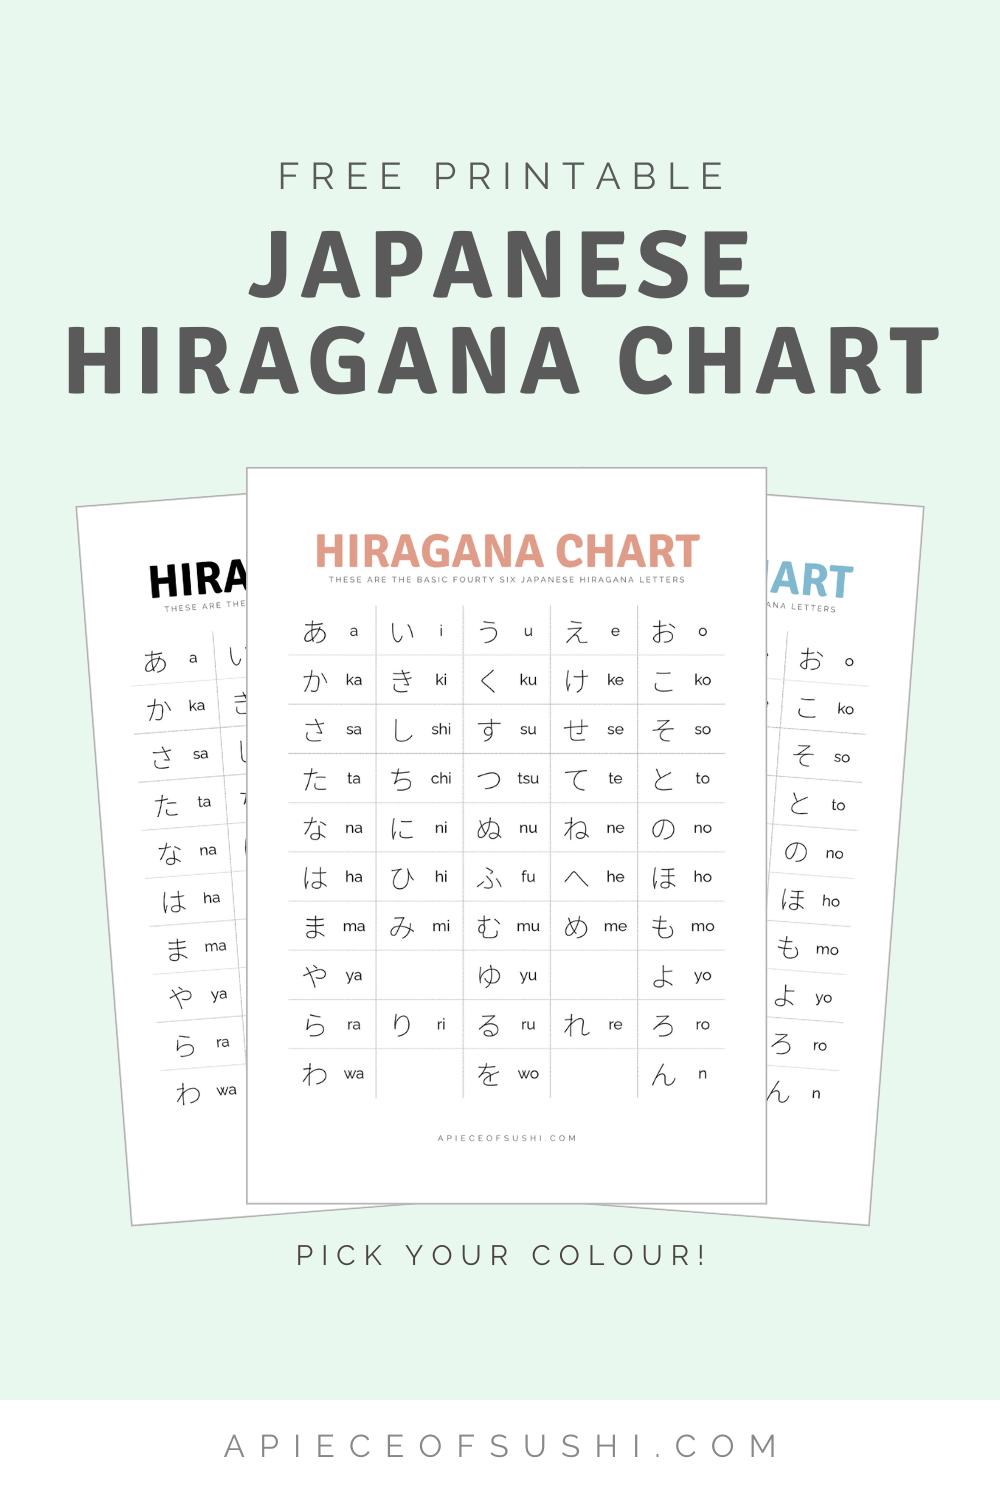 Learn Japanese for Beginners - The Hiragana and Katakana Workbook: The Easy, Step-by-Step Study Guide and Writing Practice Book: Best Way to Learn Japanese and How to Write the Alphabet of Japan (Flash Cards and Letter Chart Inside) [Book]